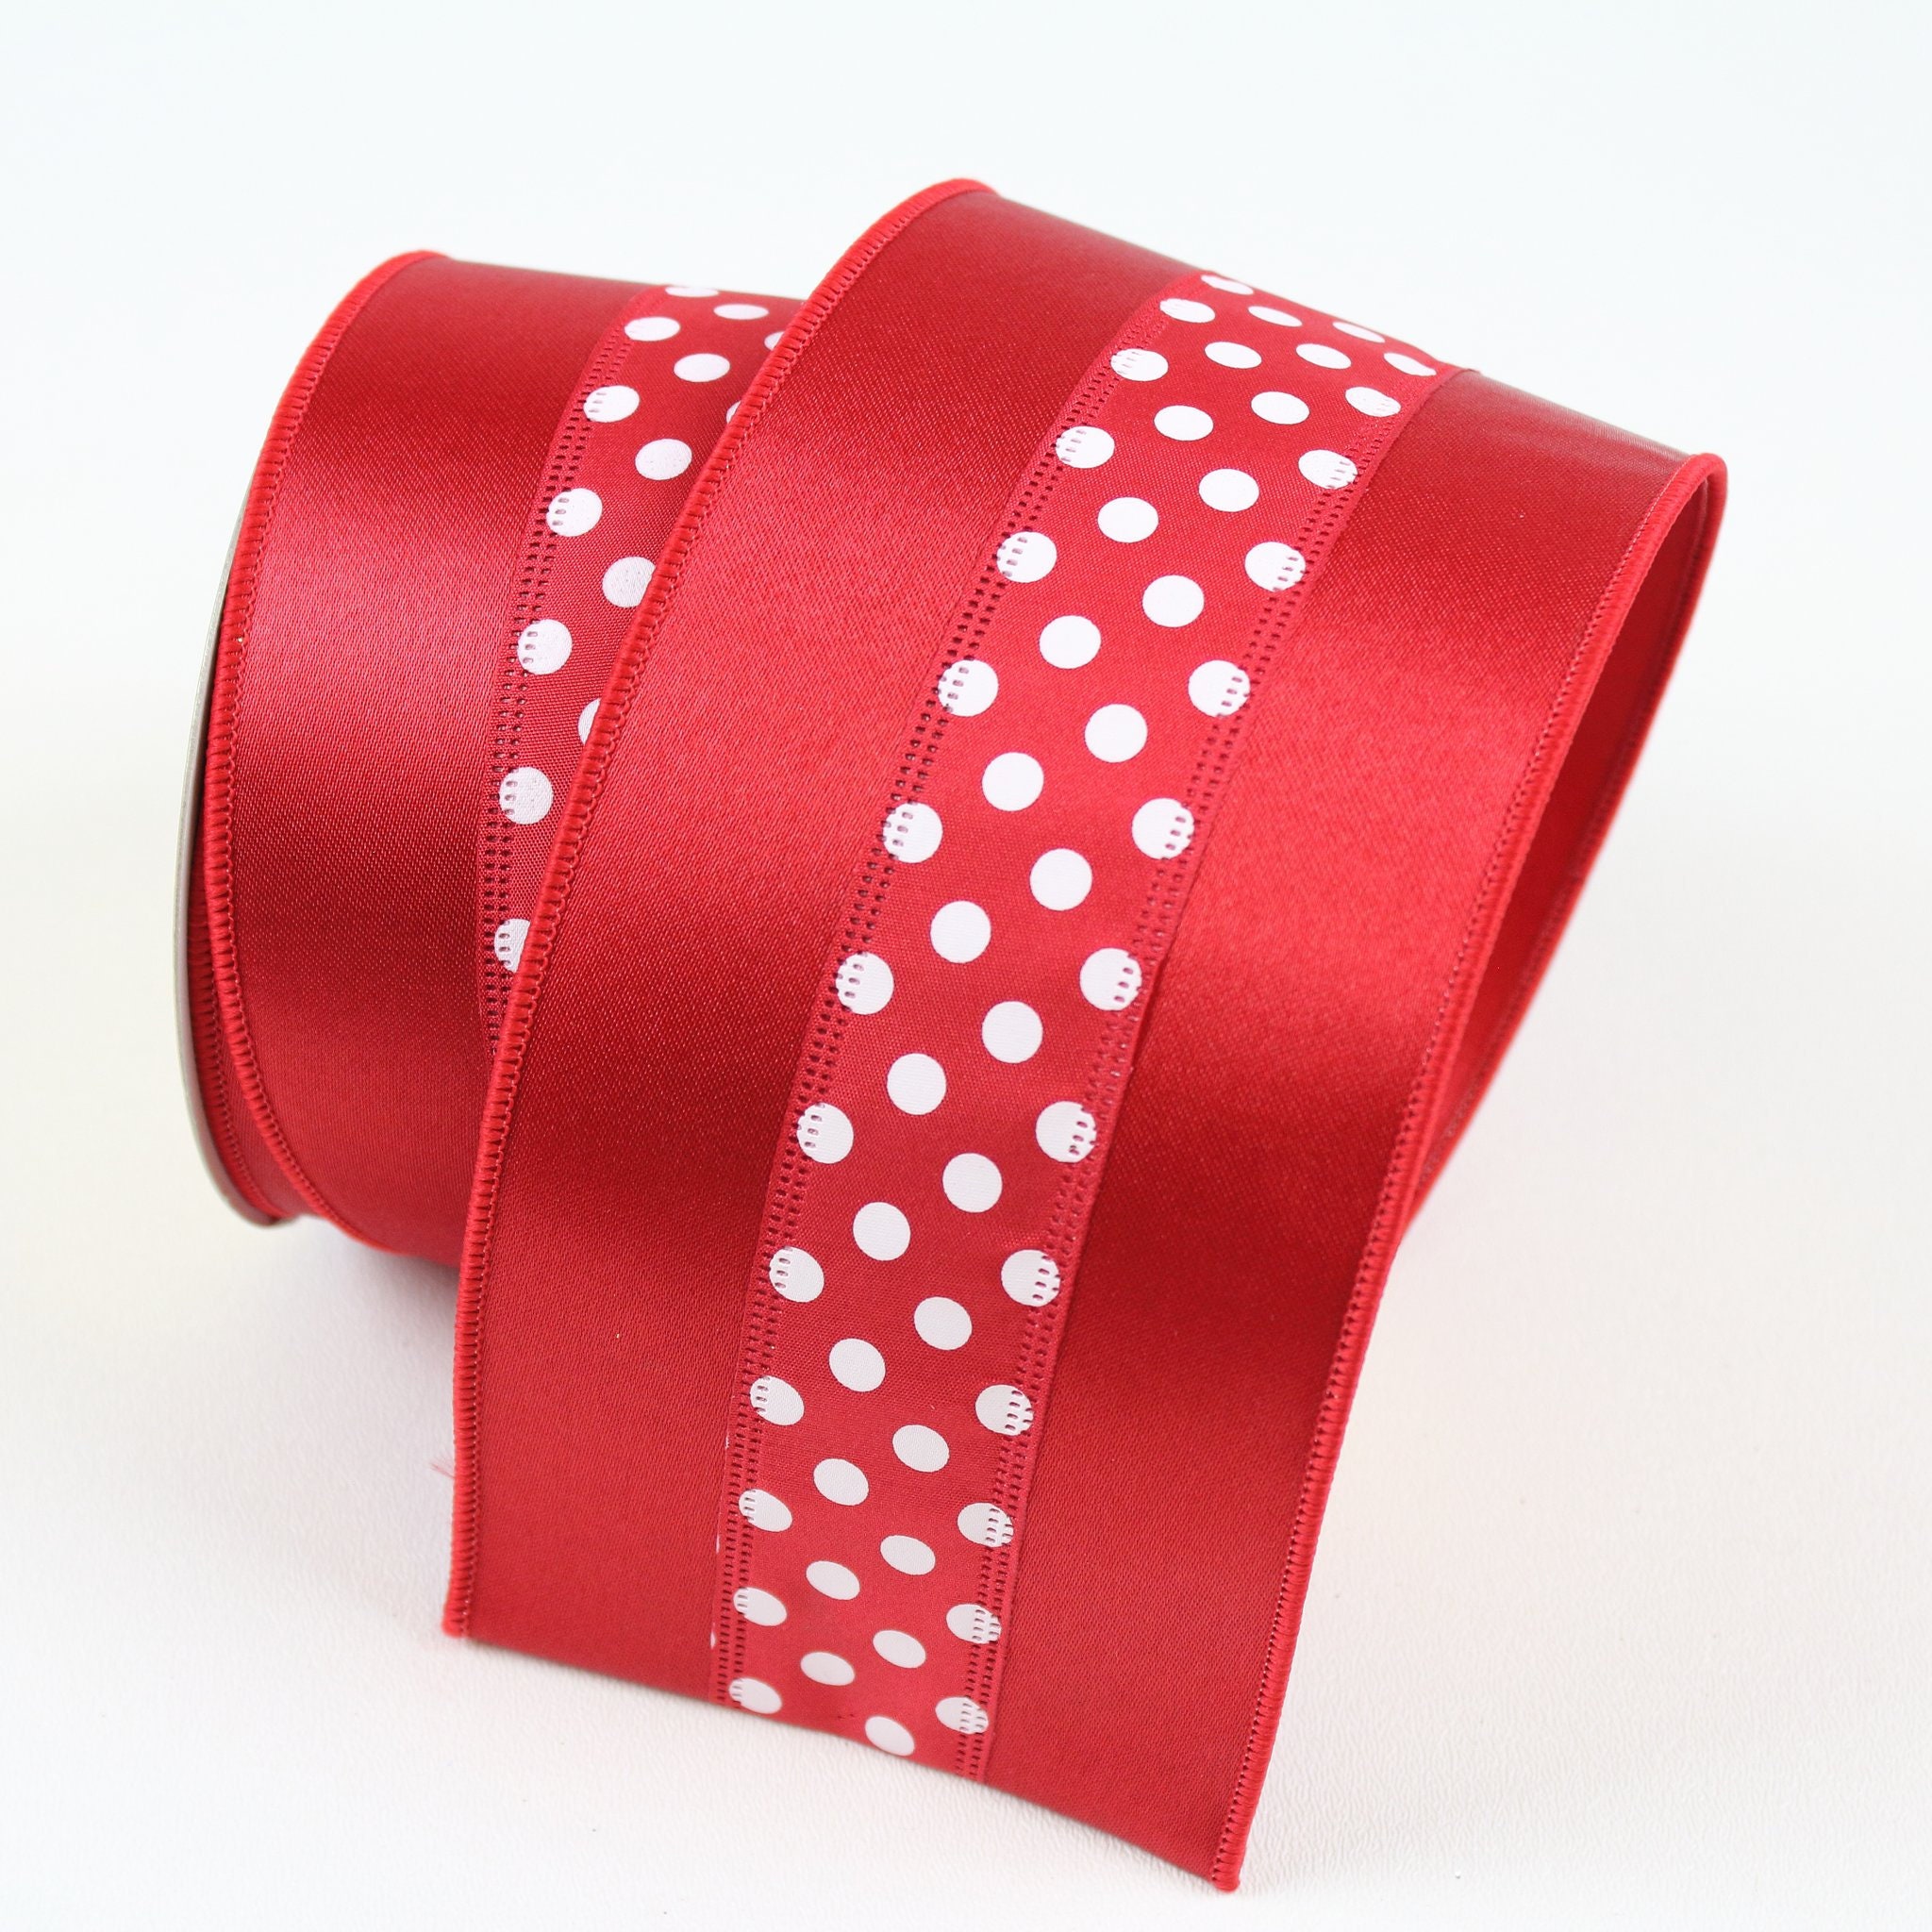 Solid Color Satin Fabric Ribbon (red, 1/2 x 25 Yards)